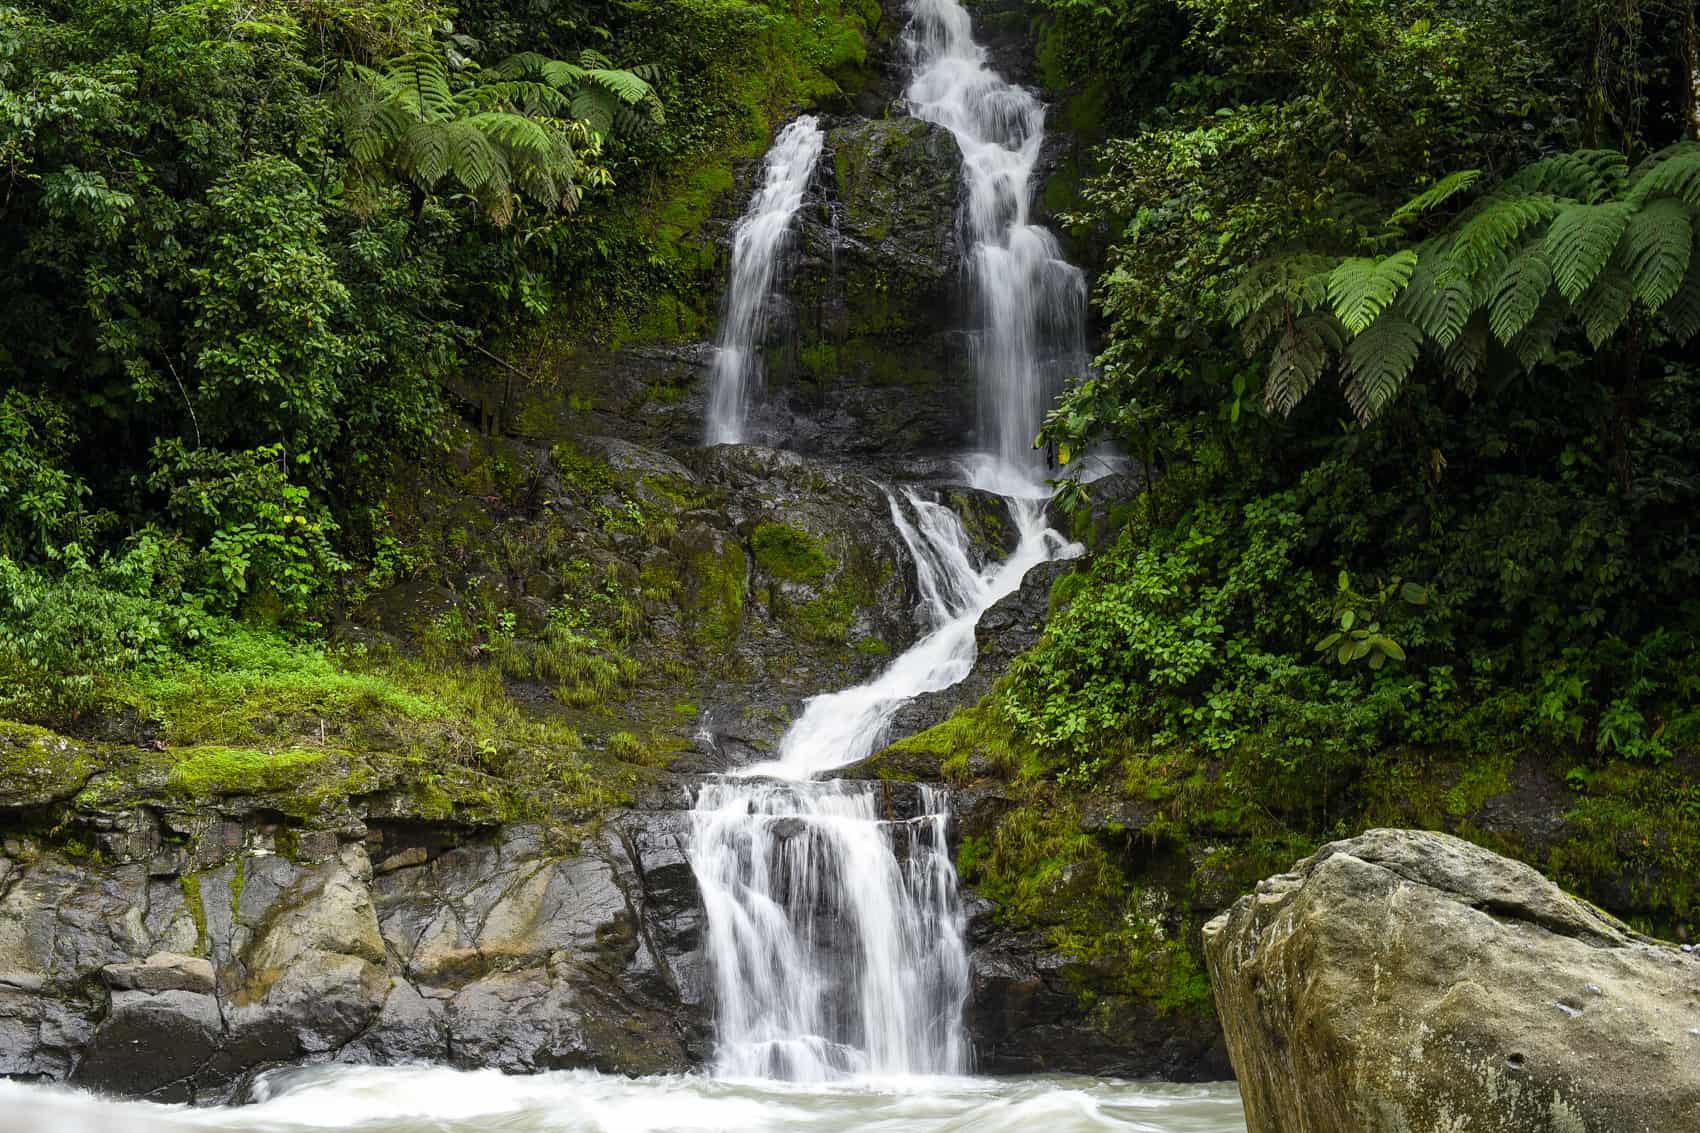 One of many waterfalls spilling into the Pacuare.